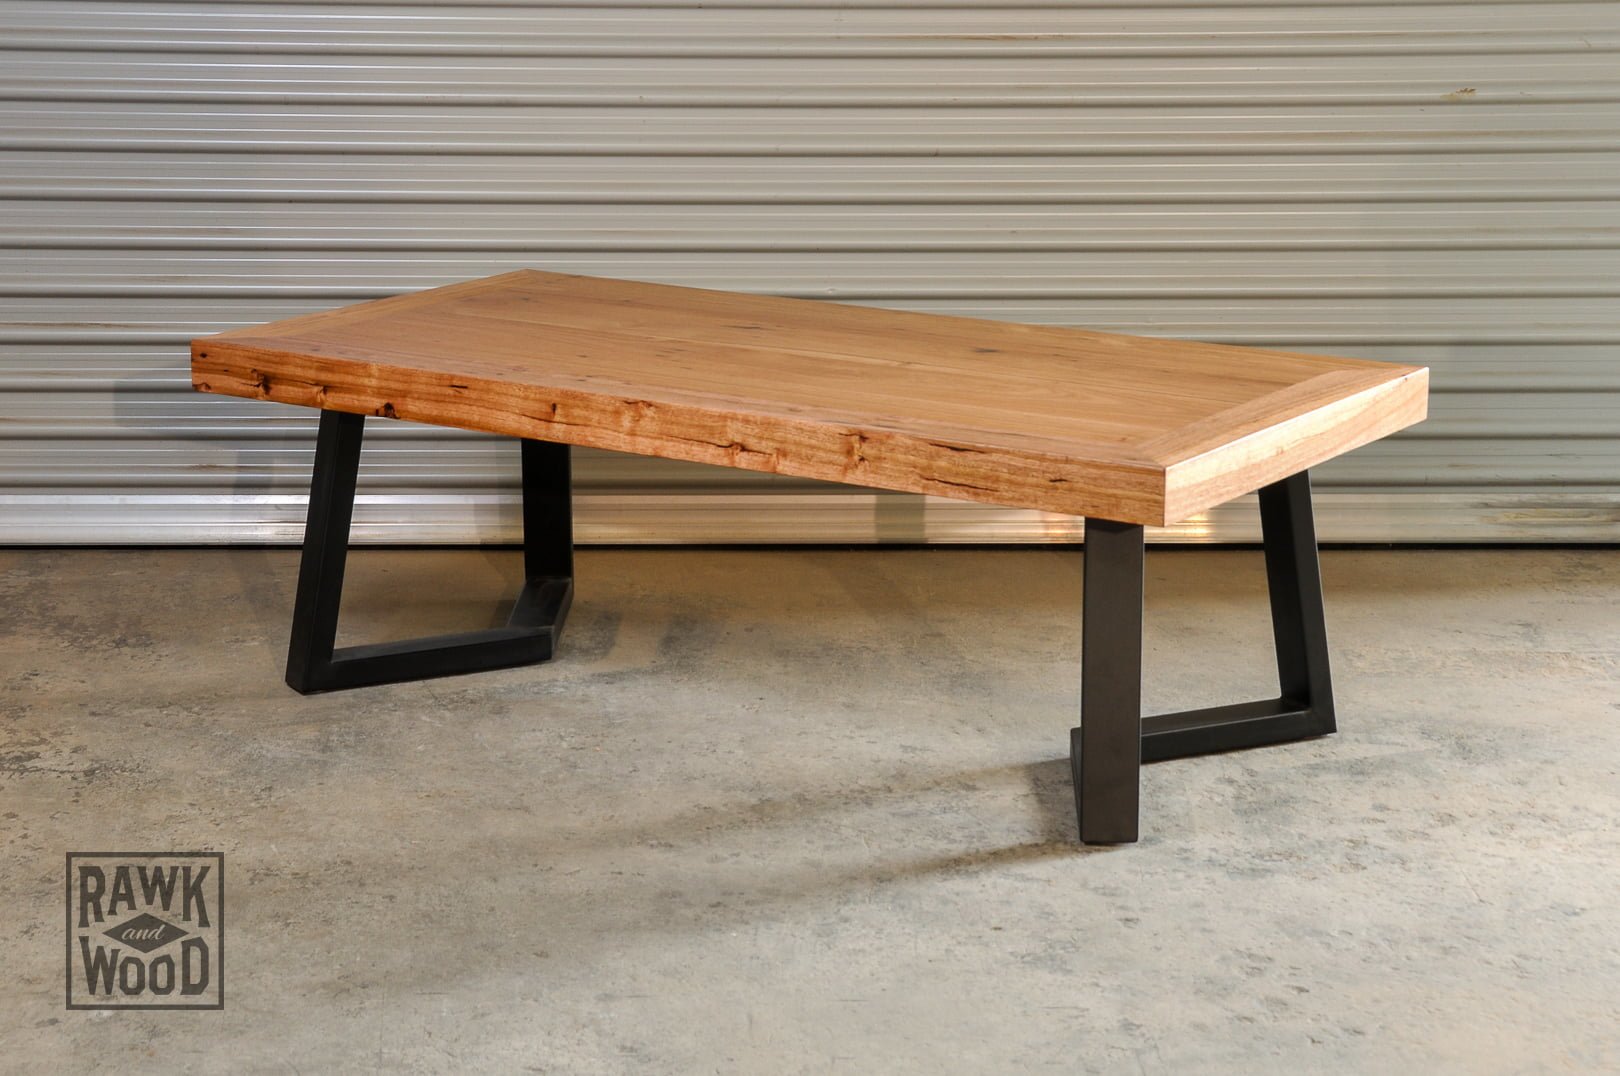 Recycled-Timber-Coffee-Table, made in Melbourne by Rawk and Wood